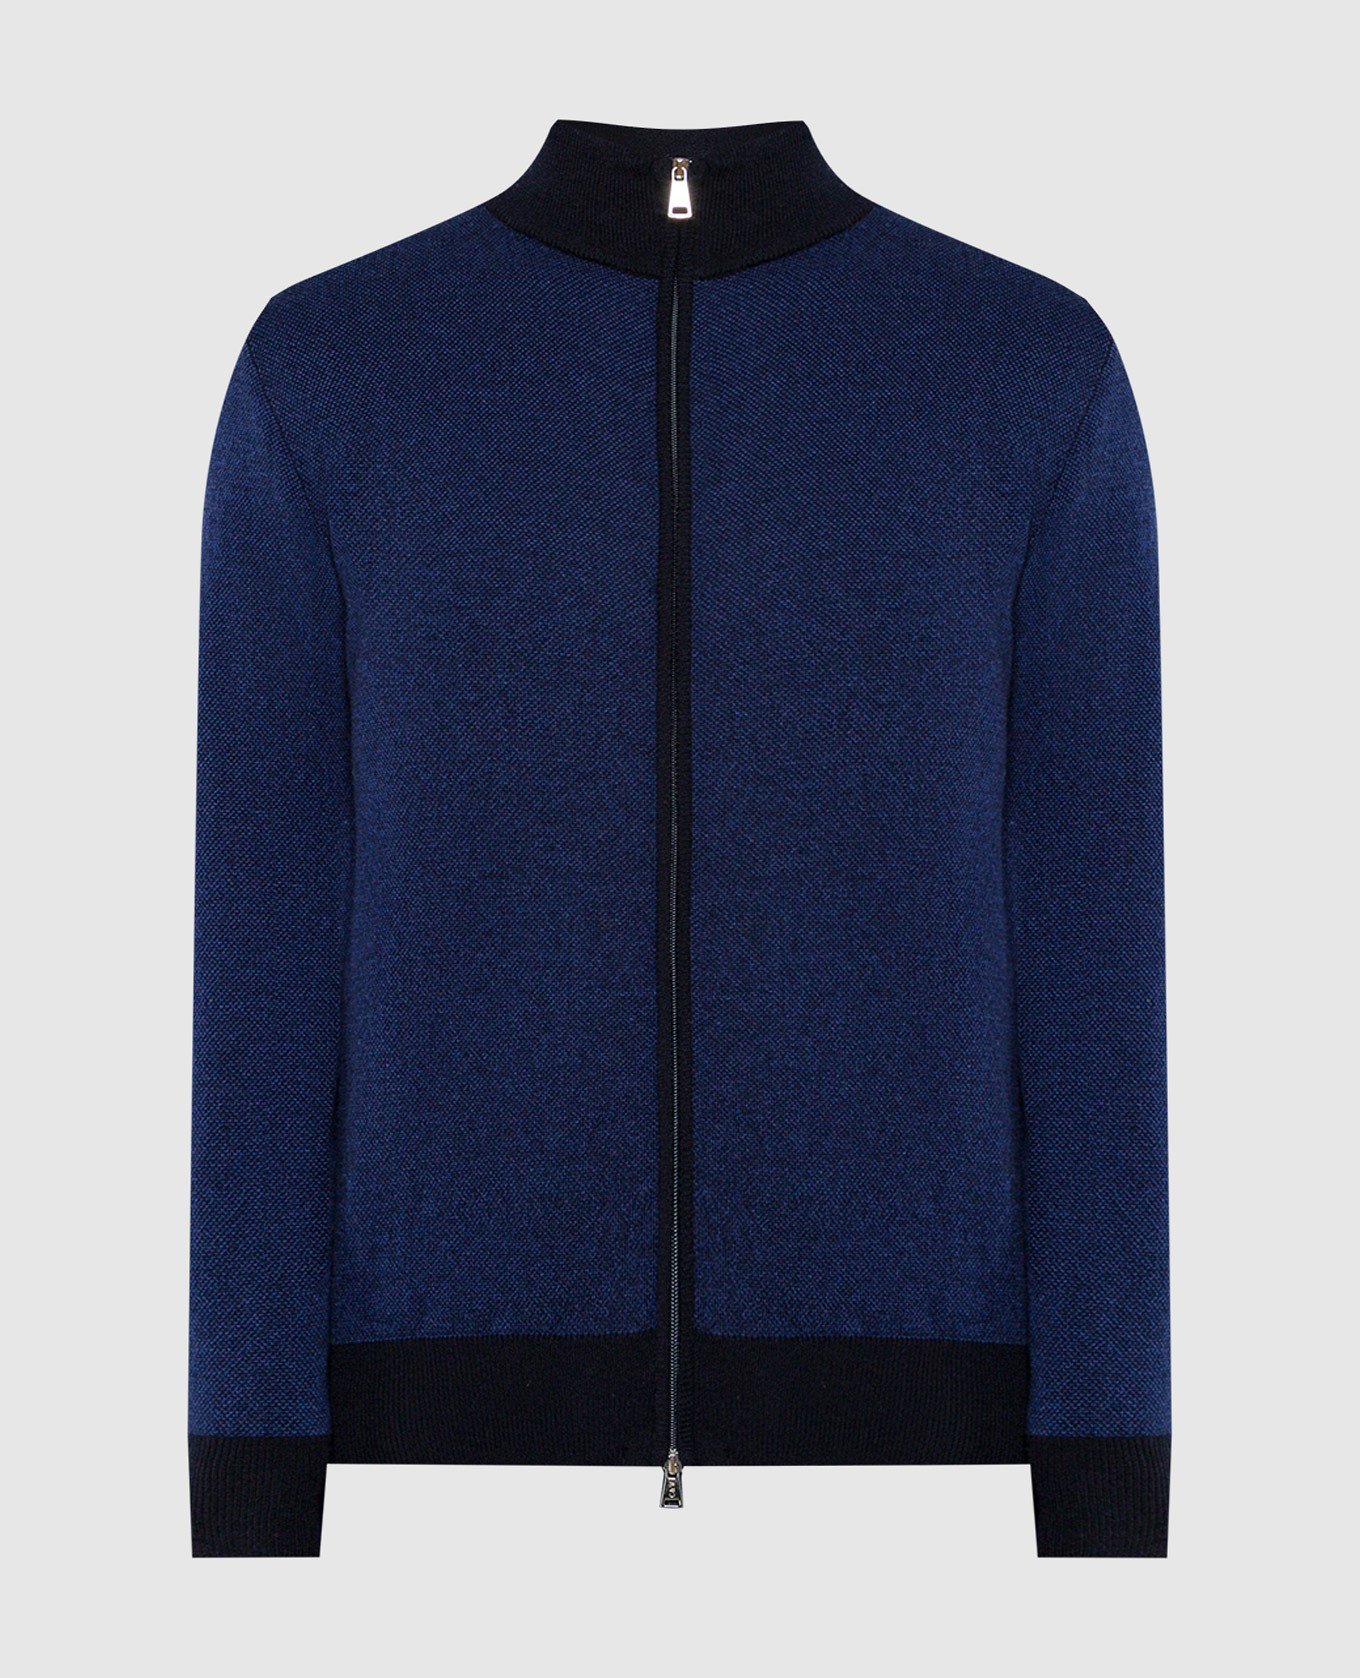 Blue wool and cashmere cardigan